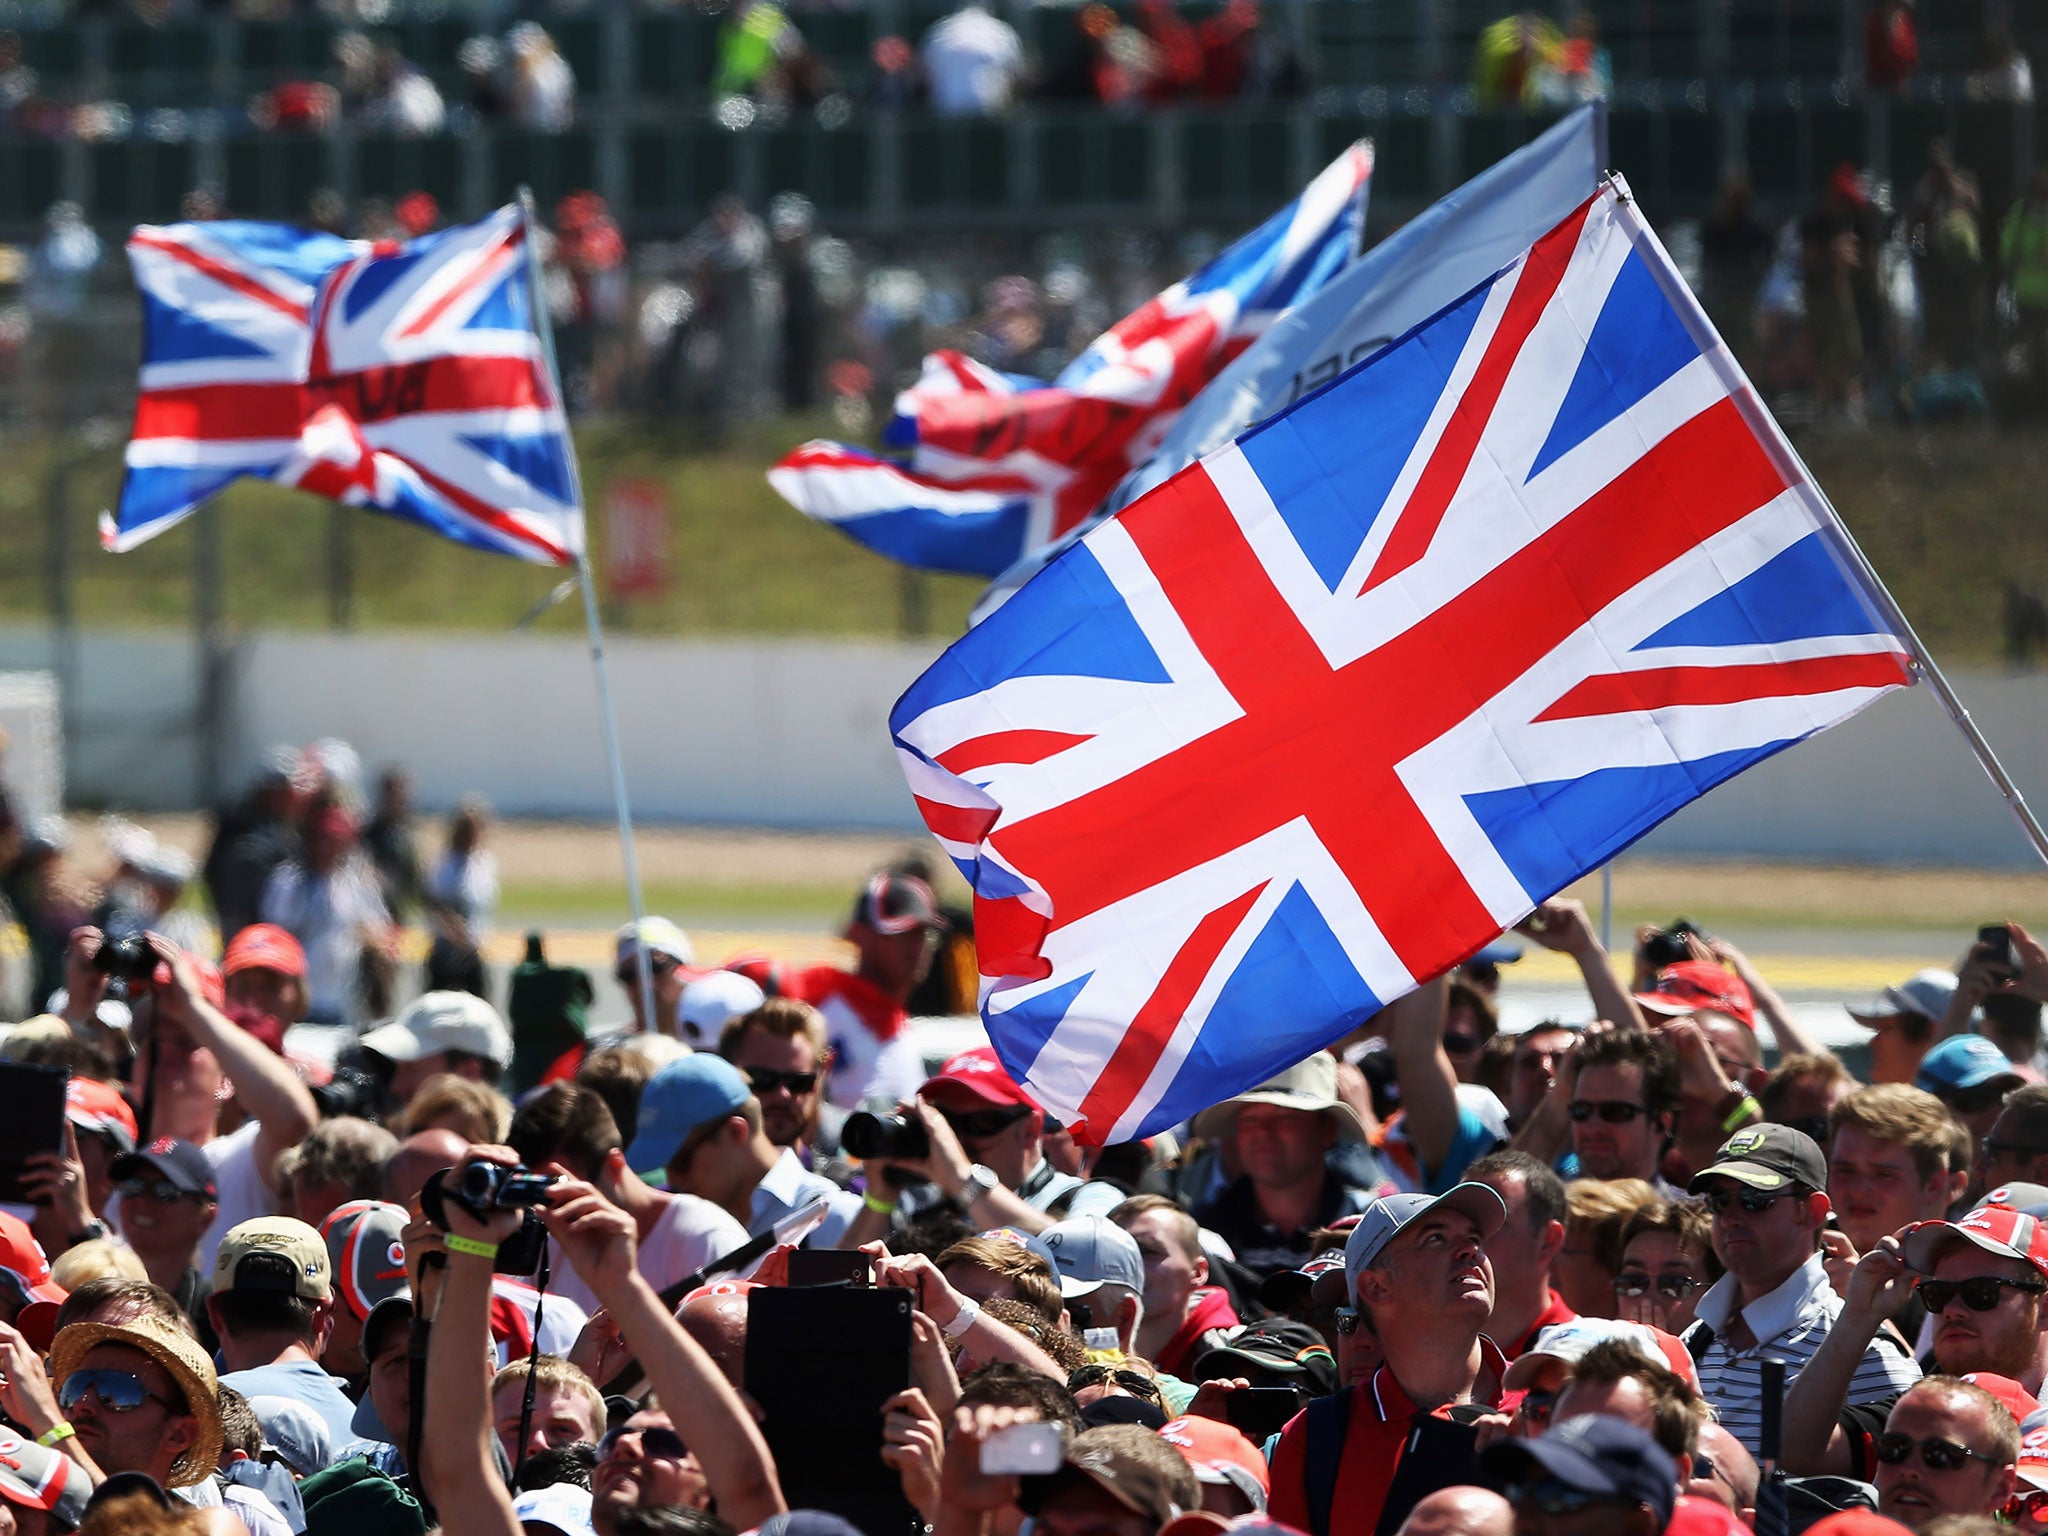 The 2015 British Grand Prix takes place this weekend